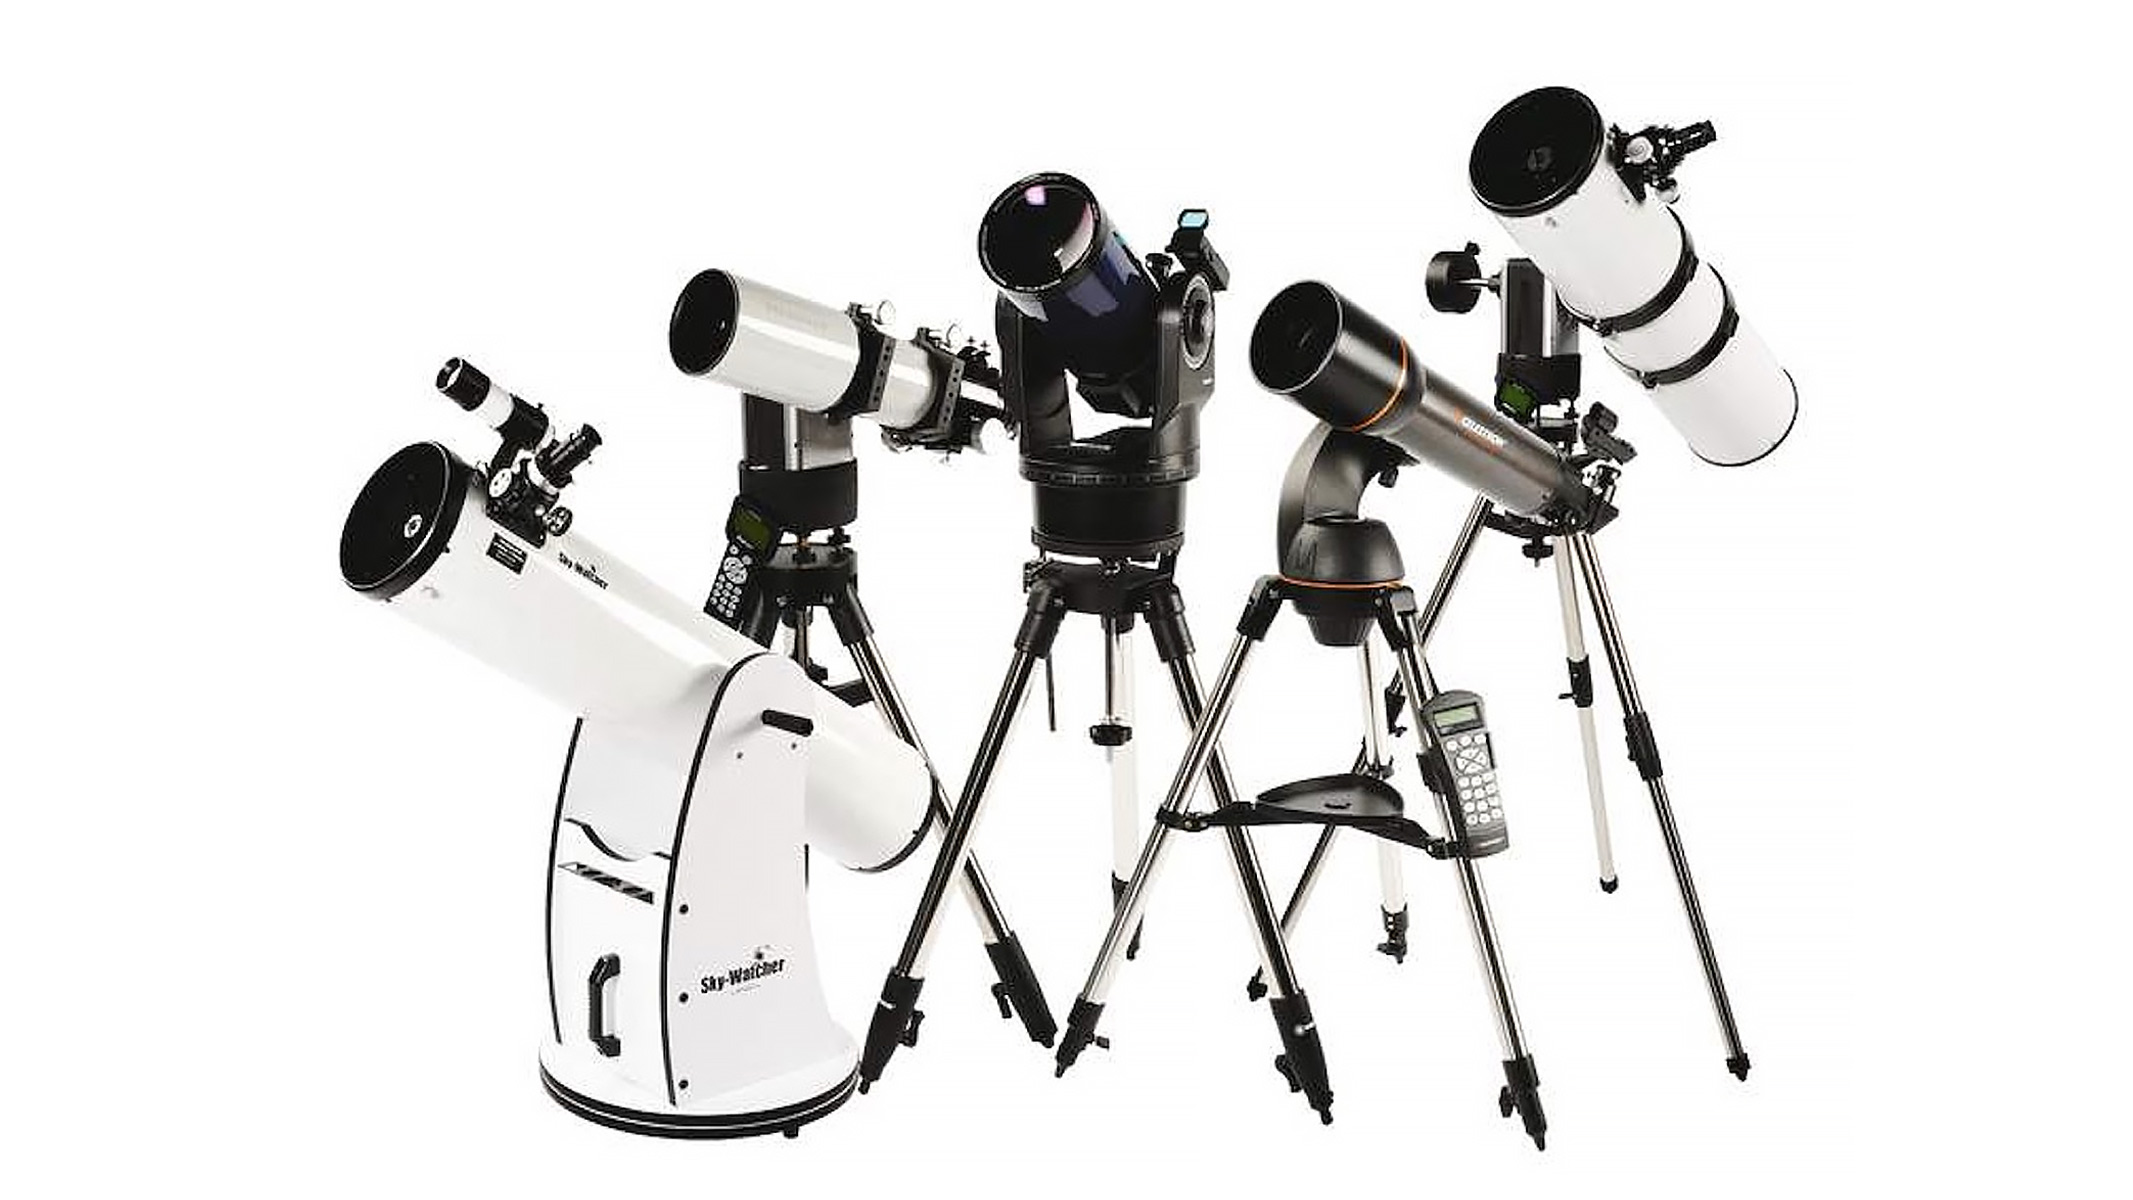 Best Handheld Telescope For Viewing Planets